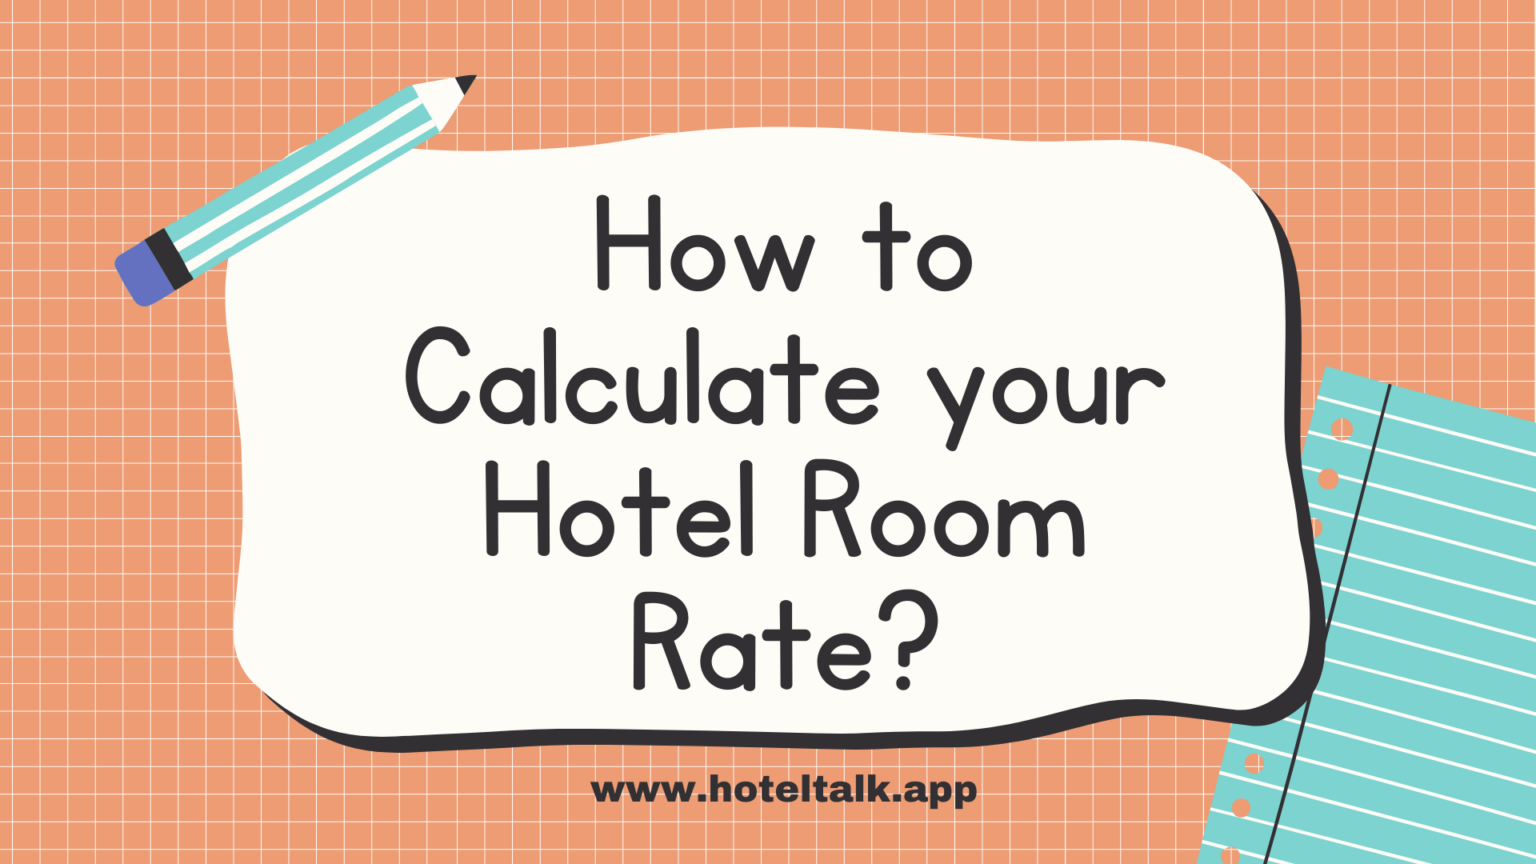 How To Calculate Your Hotel Room Rate 1 1536x864 